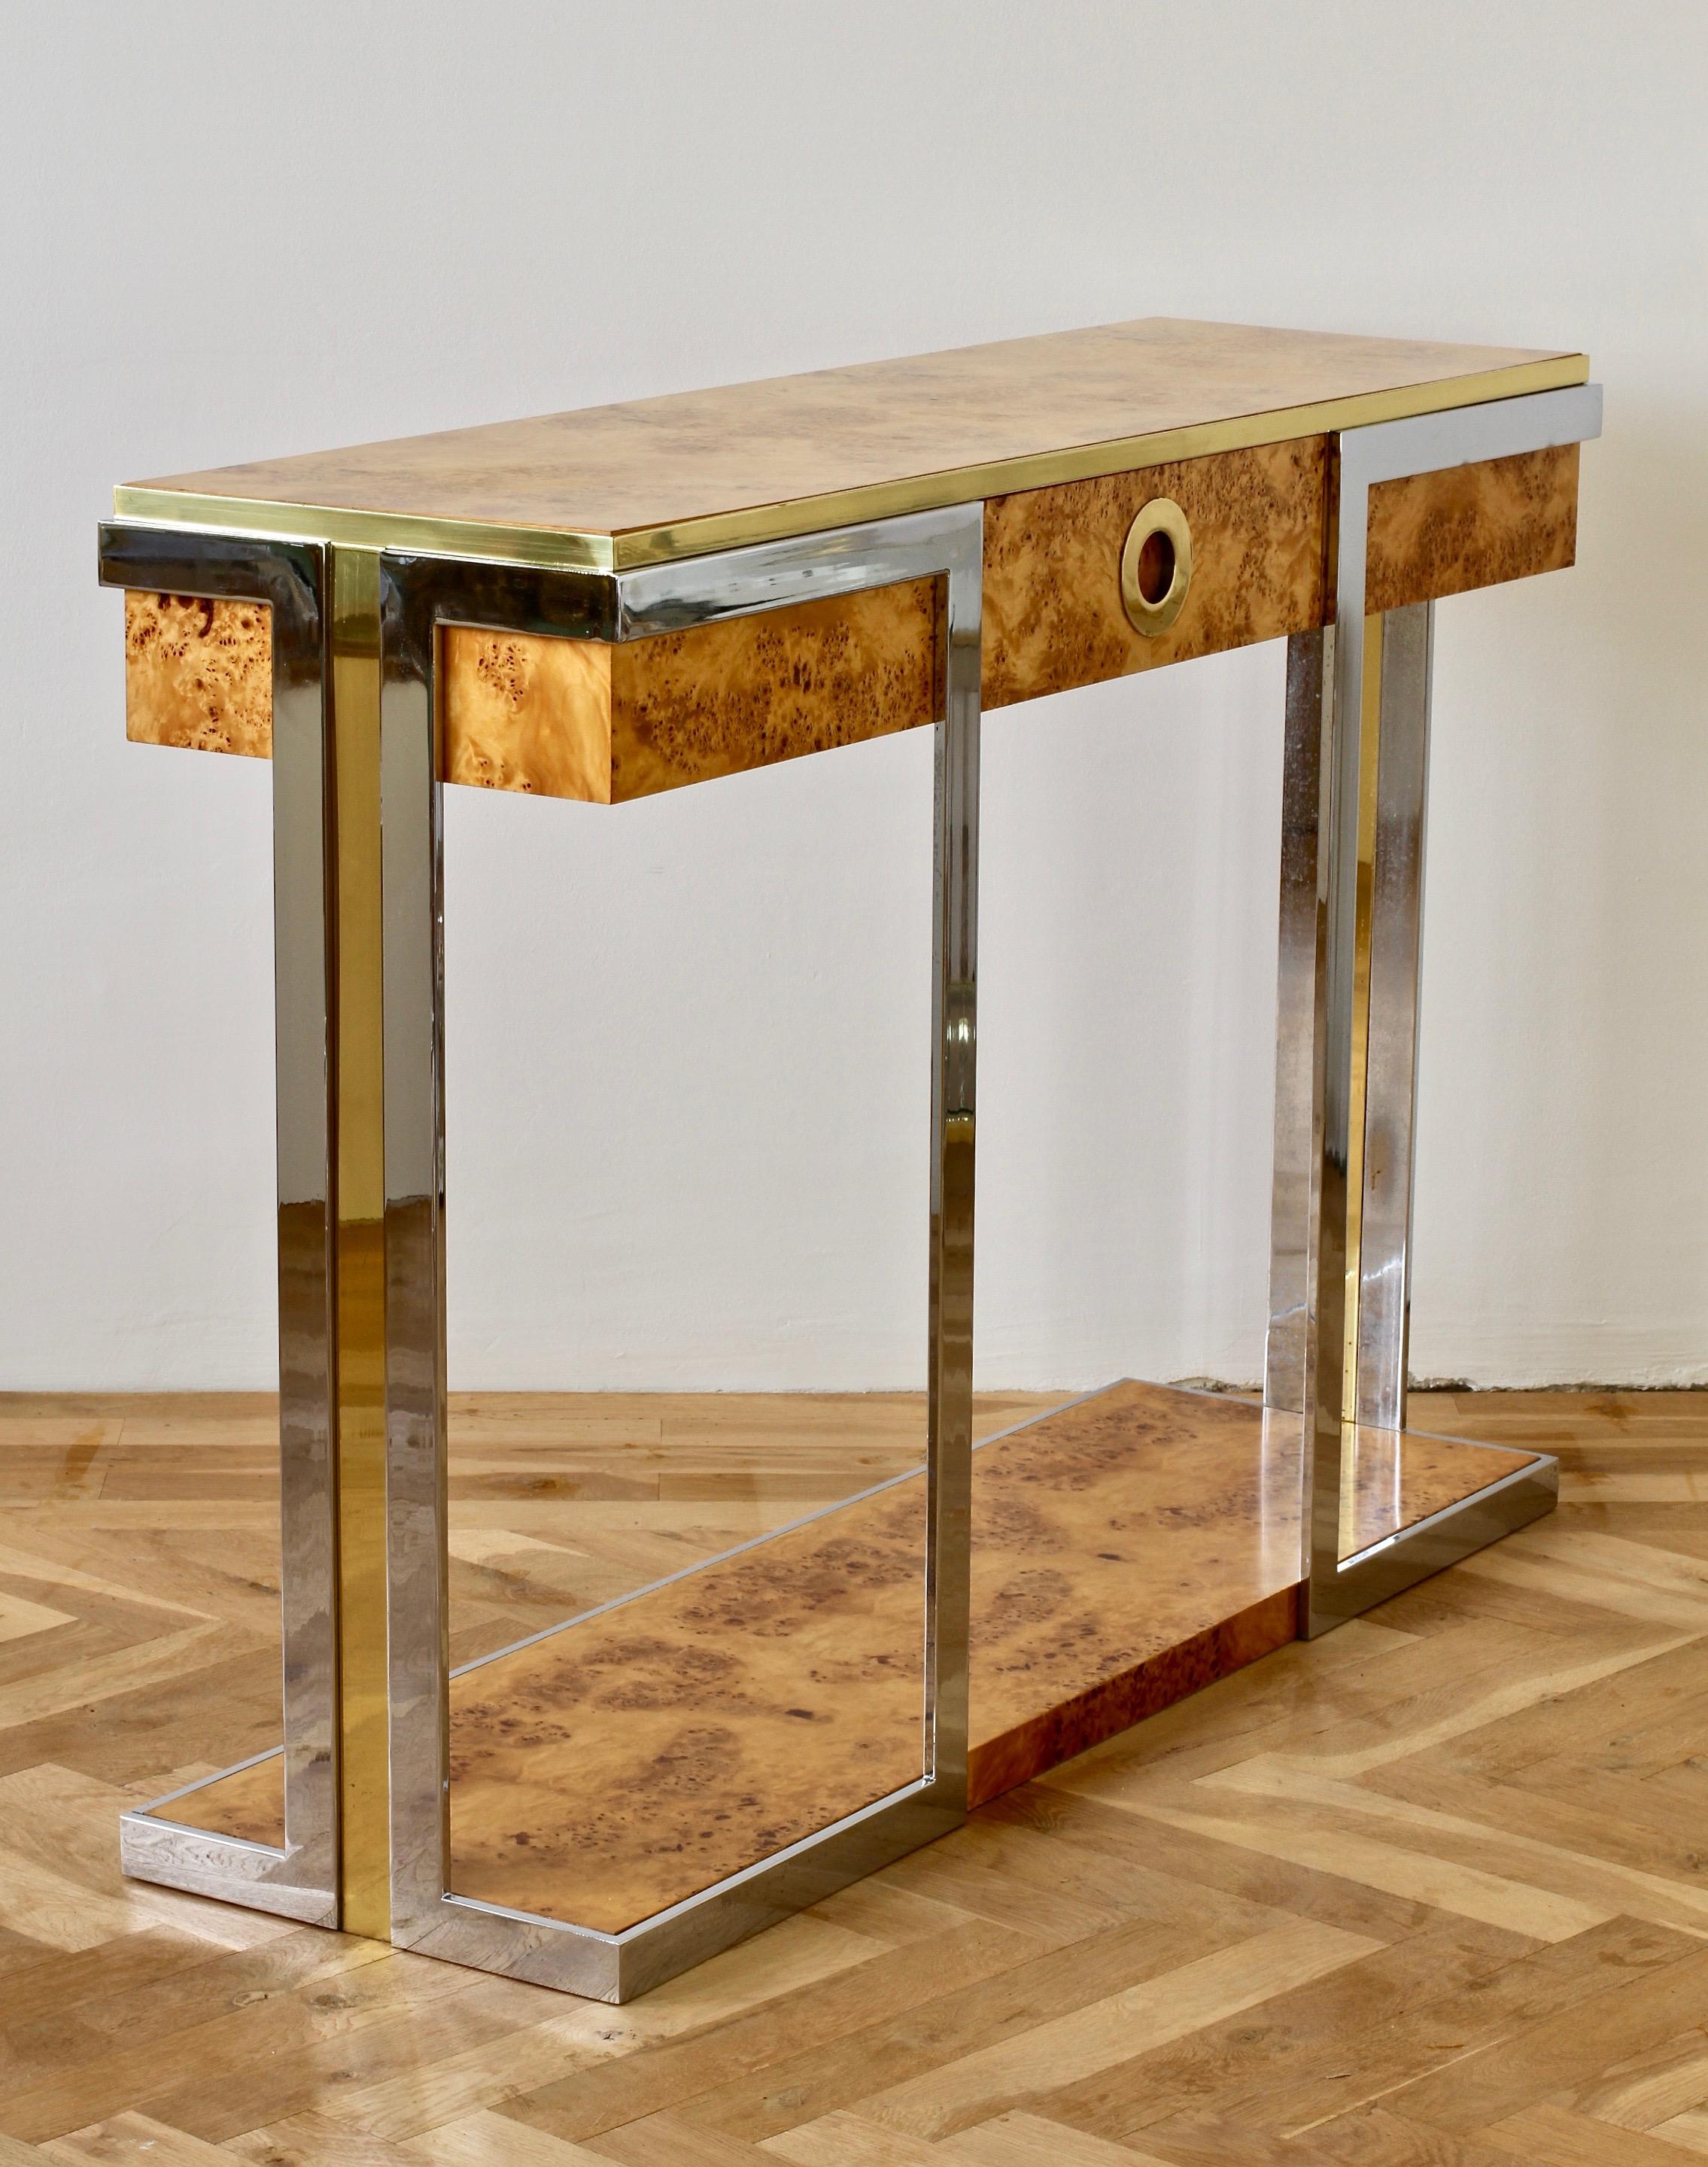 Willy Rizzo for Mario Sabot Industries console, hallway, foyer or entry table. Featuring burled olive wood veneer with brass and chrome legs - this piece has a contemporary Art Deco feel and style about it whilst, at the same time, fitting